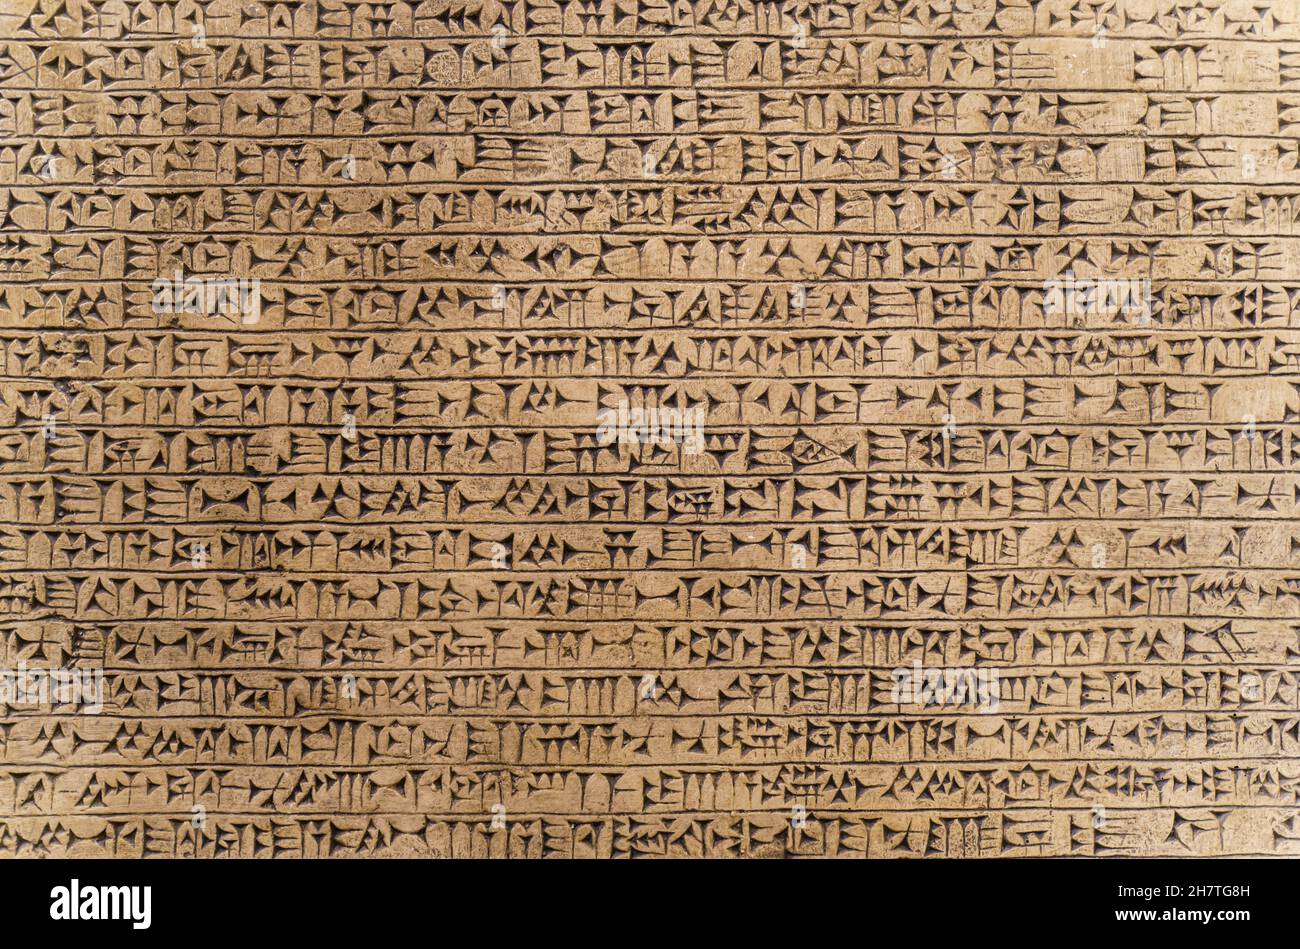 Babylonian historical writing background. Ancient hieroglyphs of the Sumerian and Babylonian civilizations. Archaeological objects and antiquities. High quality photo Stock Photo